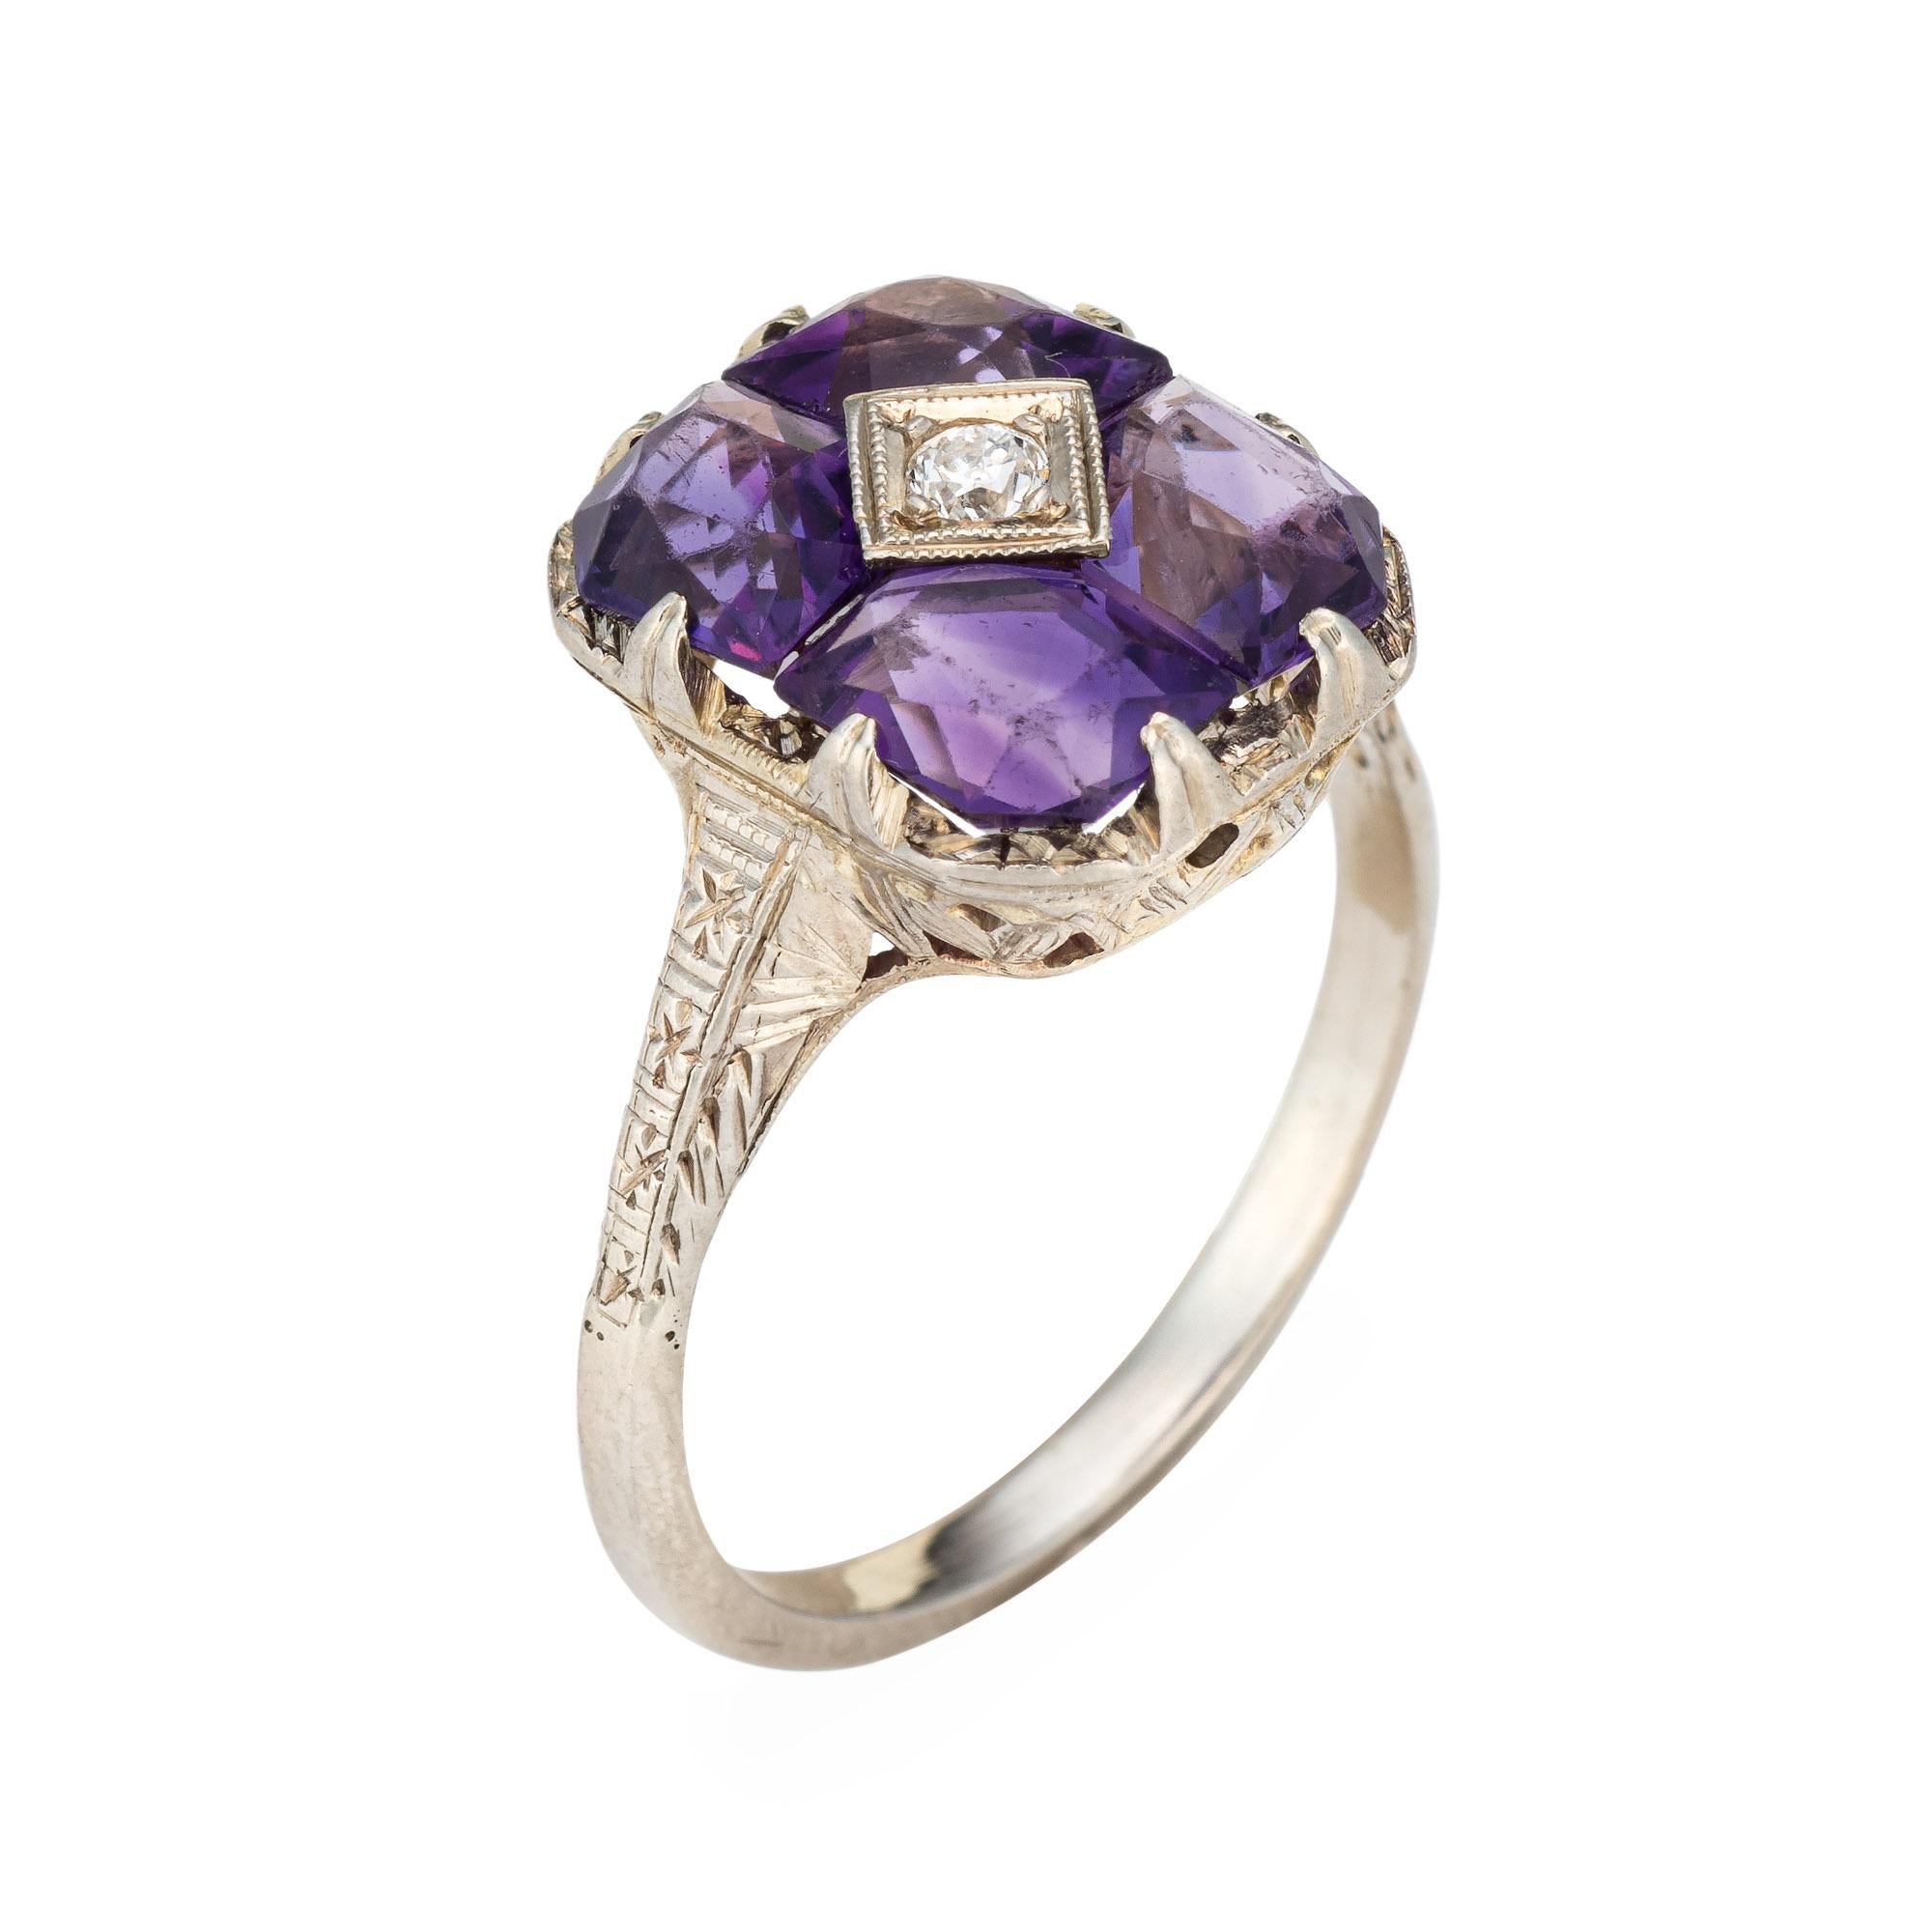 Finely detailed vintage Art Deco amethyst & diamond ring (circa 1920s to 1930s) crafted in 14k white gold. 

Old european cut diamonds is estimated 0.05 carats (estimated at I-J color and SI2 clarity). The amethysts measure 5mm each (note: light